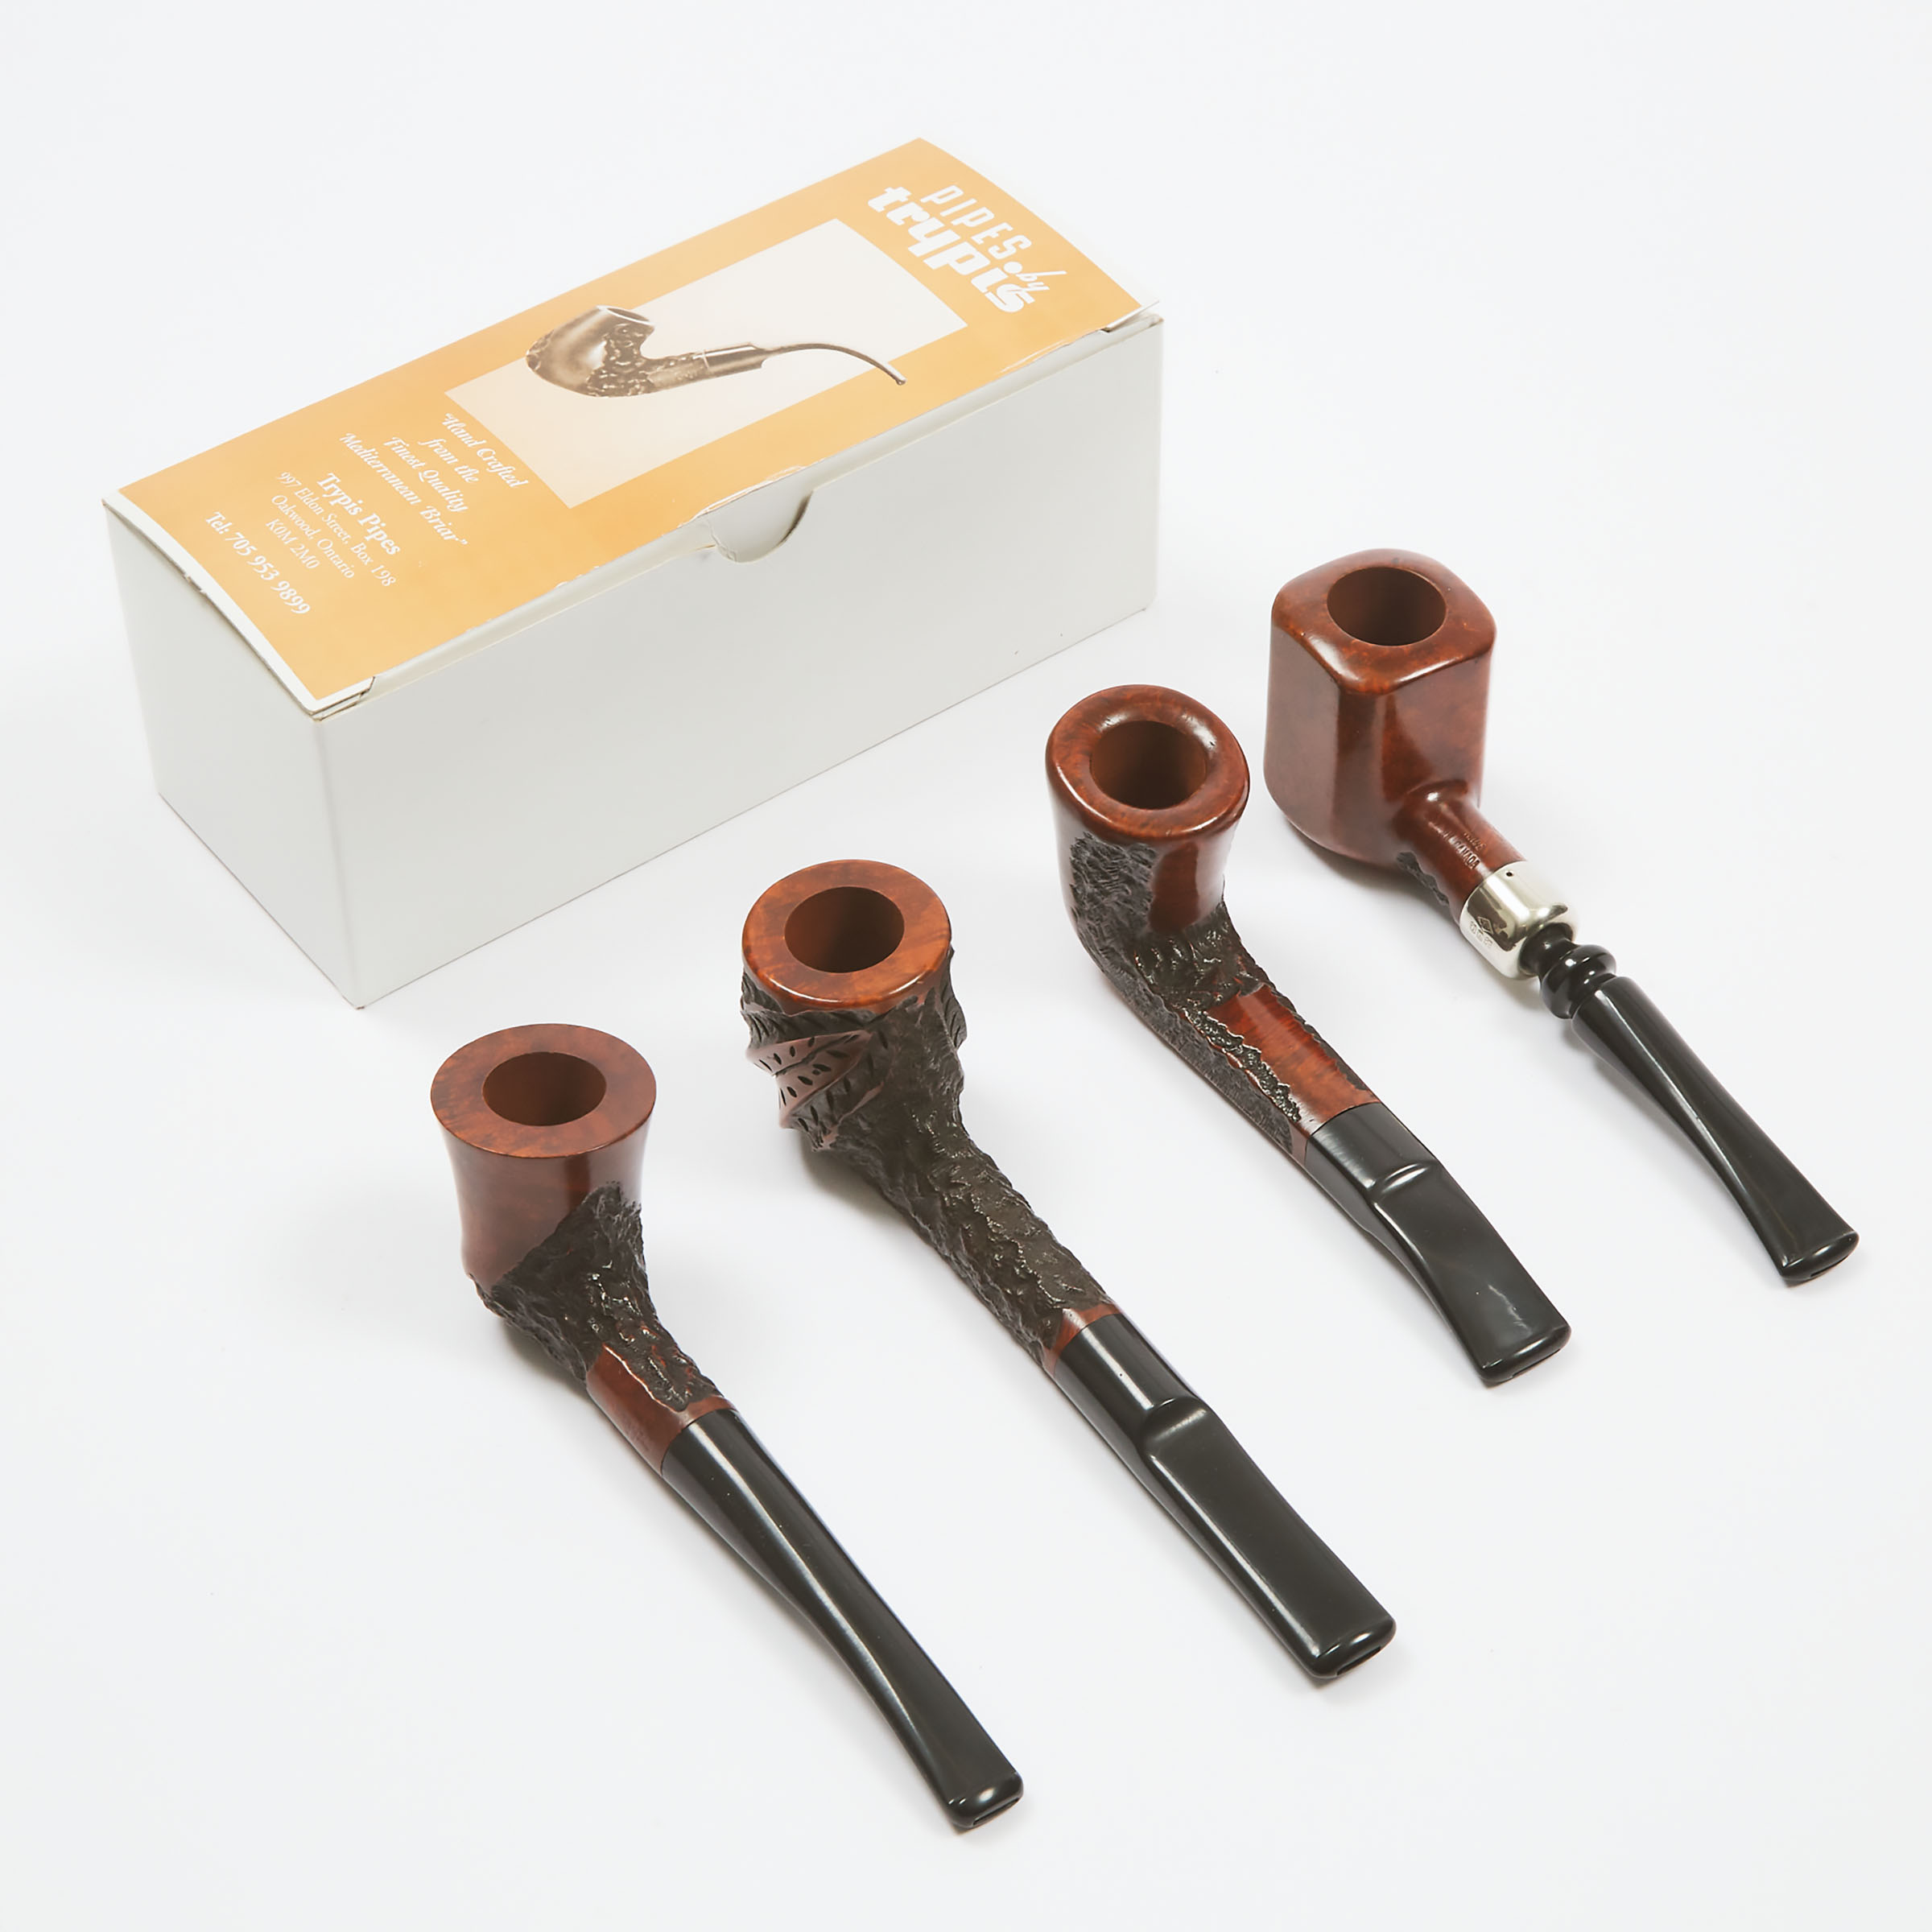 Four Tobacco Pipes by Trypis, Oakwood, ON, Canada, 21st. century